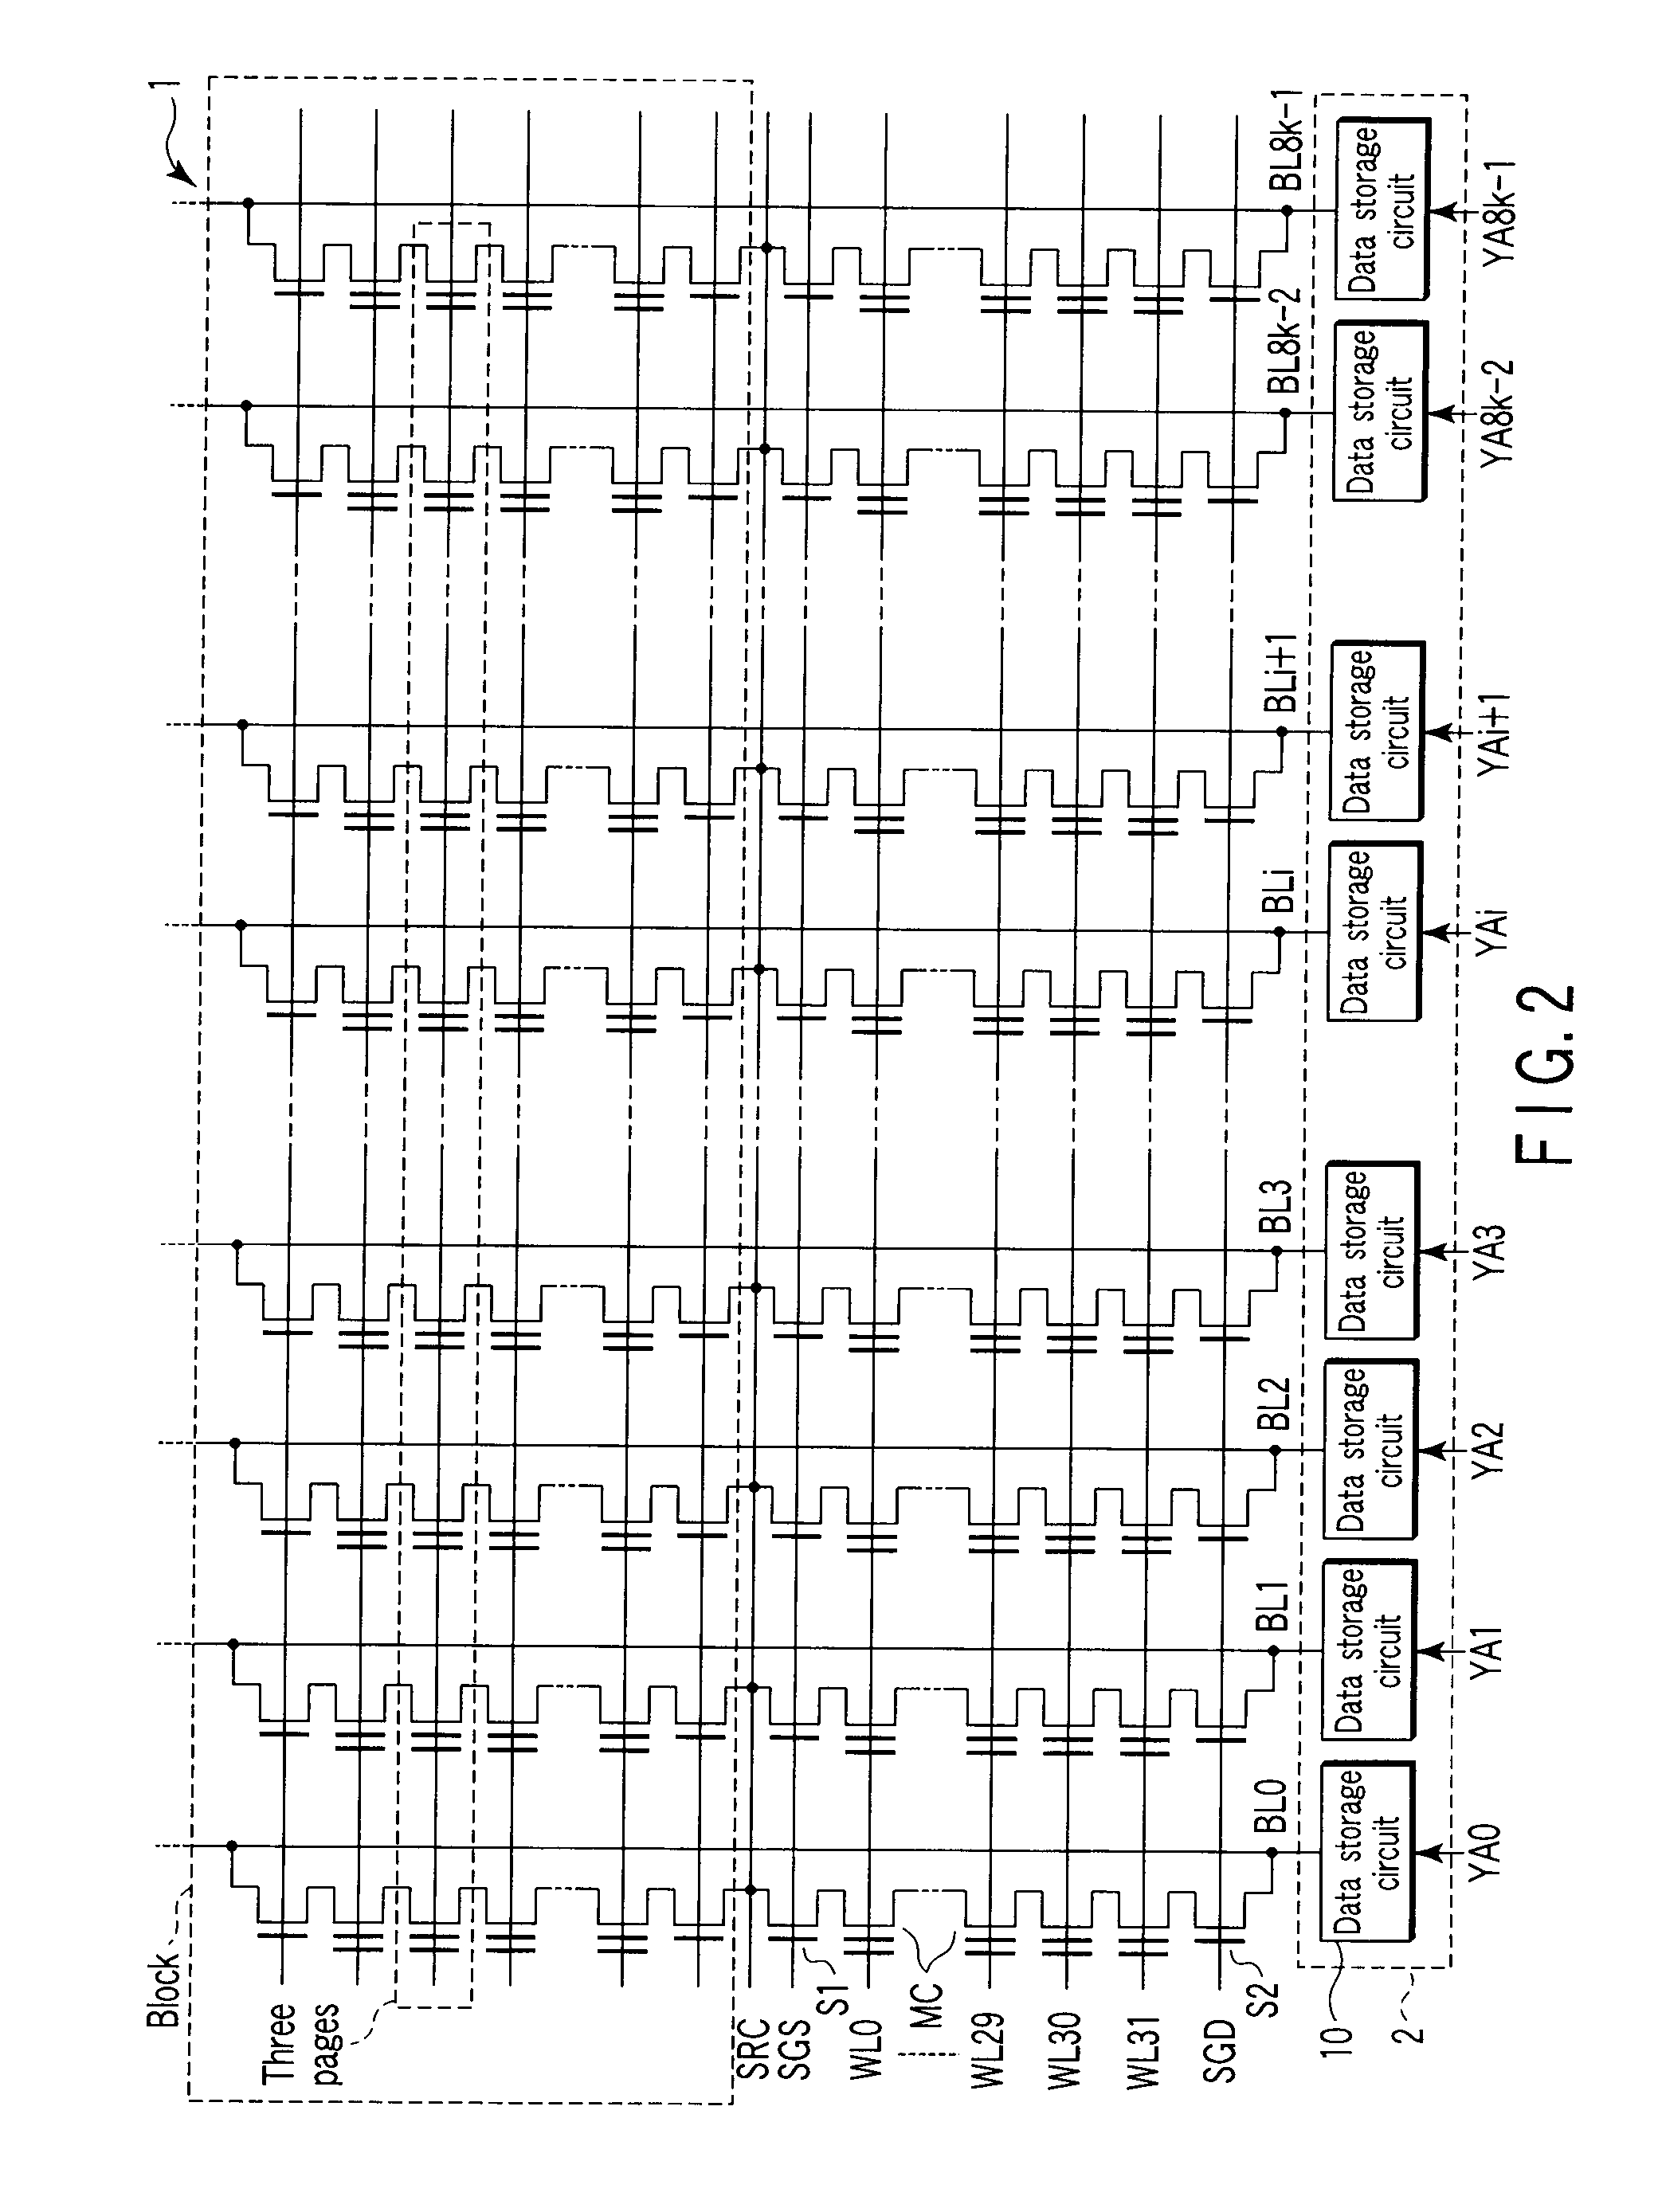 Semiconductor memory device capable of correcting a read level properly